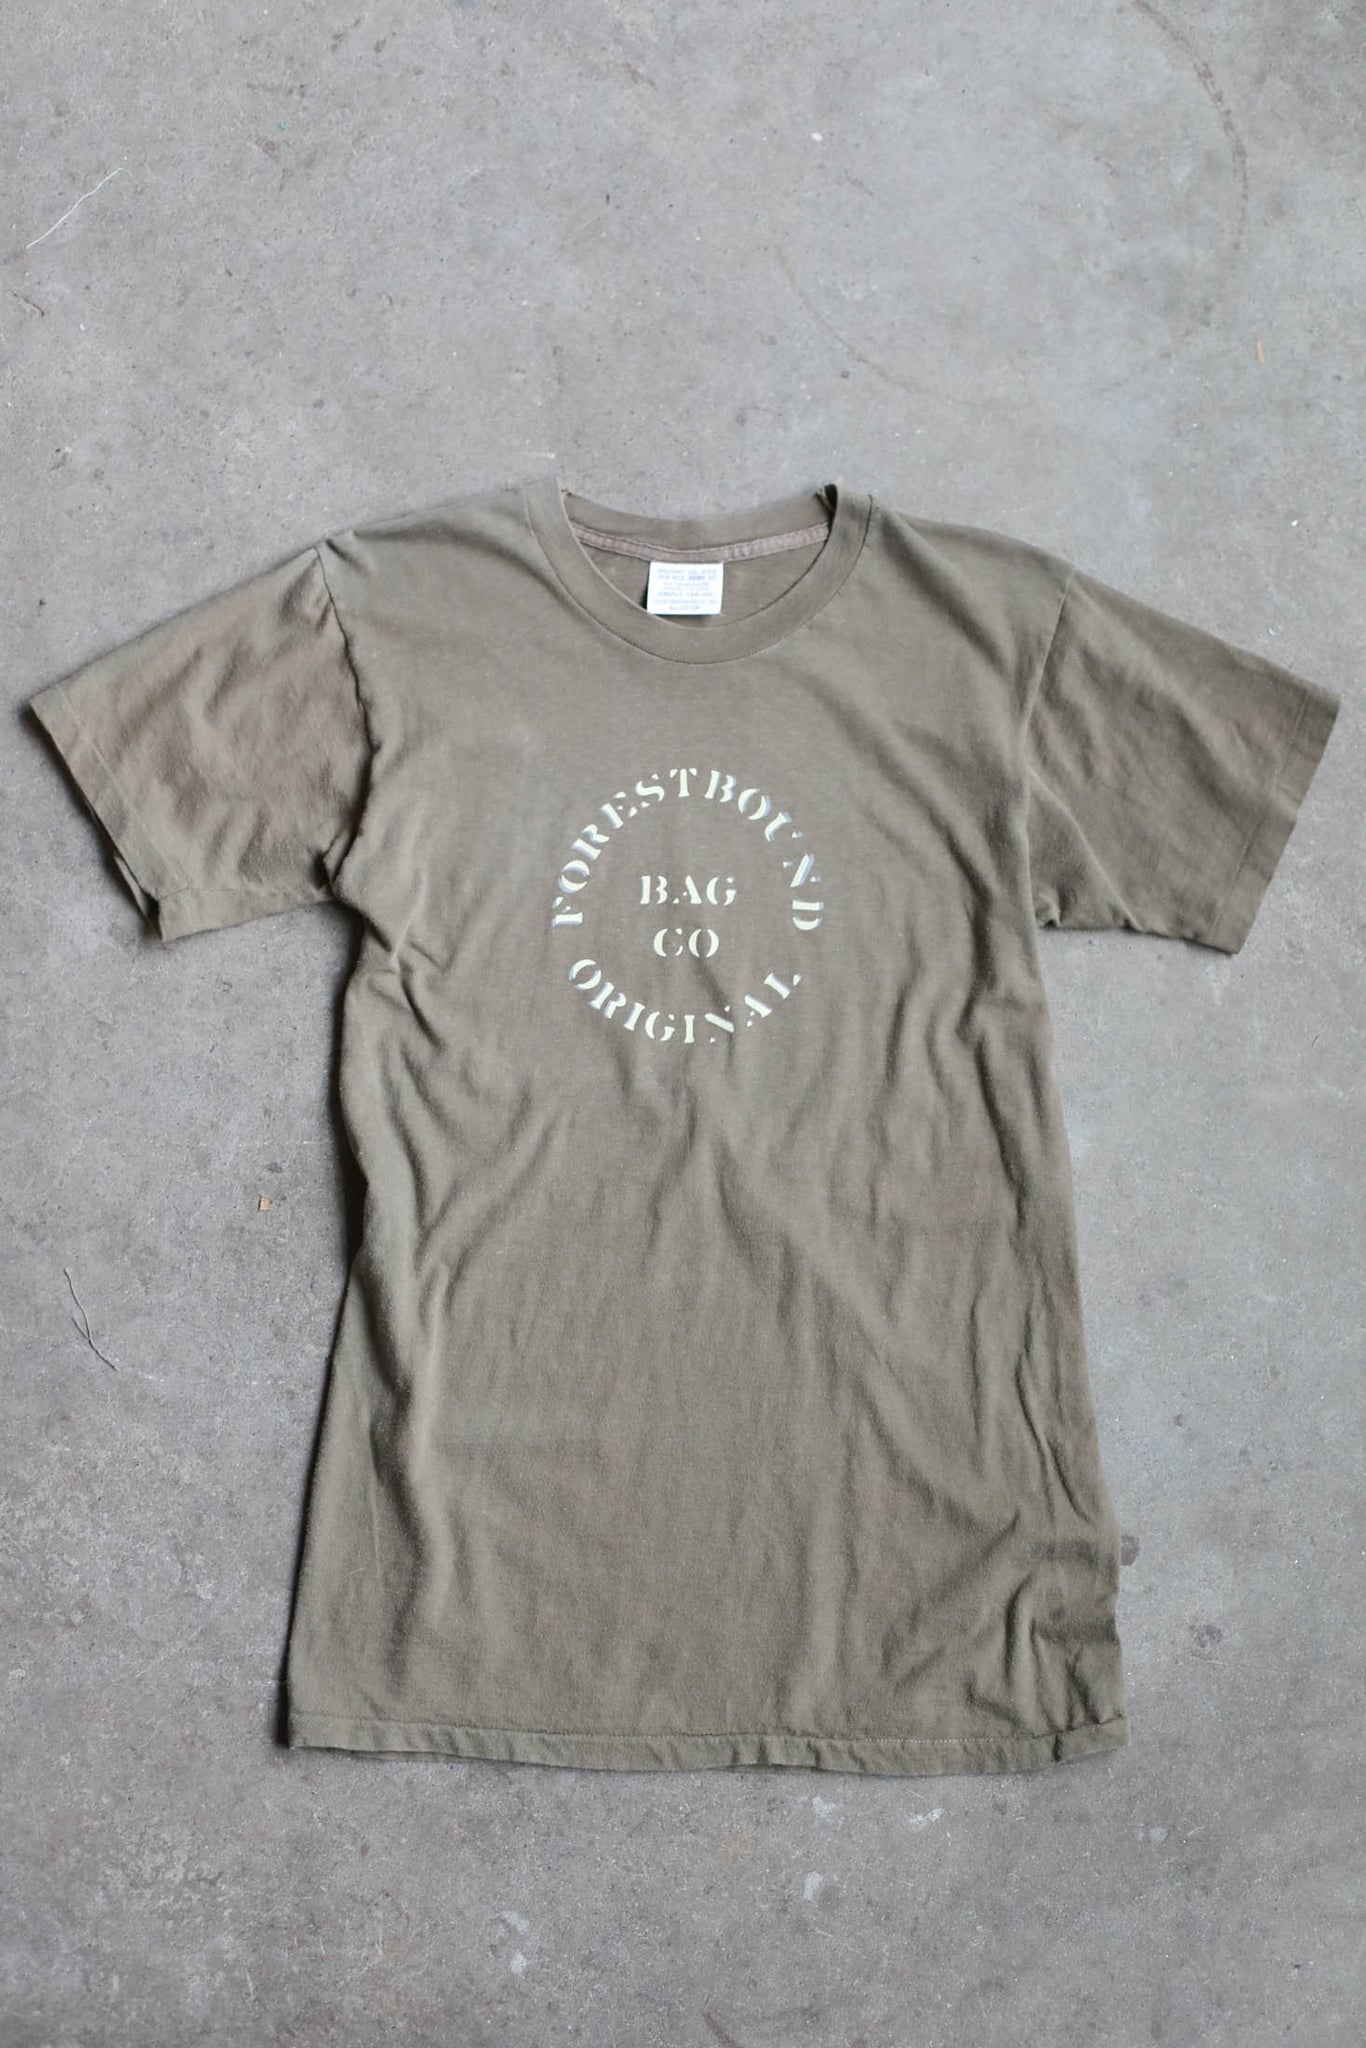 Forestbound Vintage Army Tee No. 5